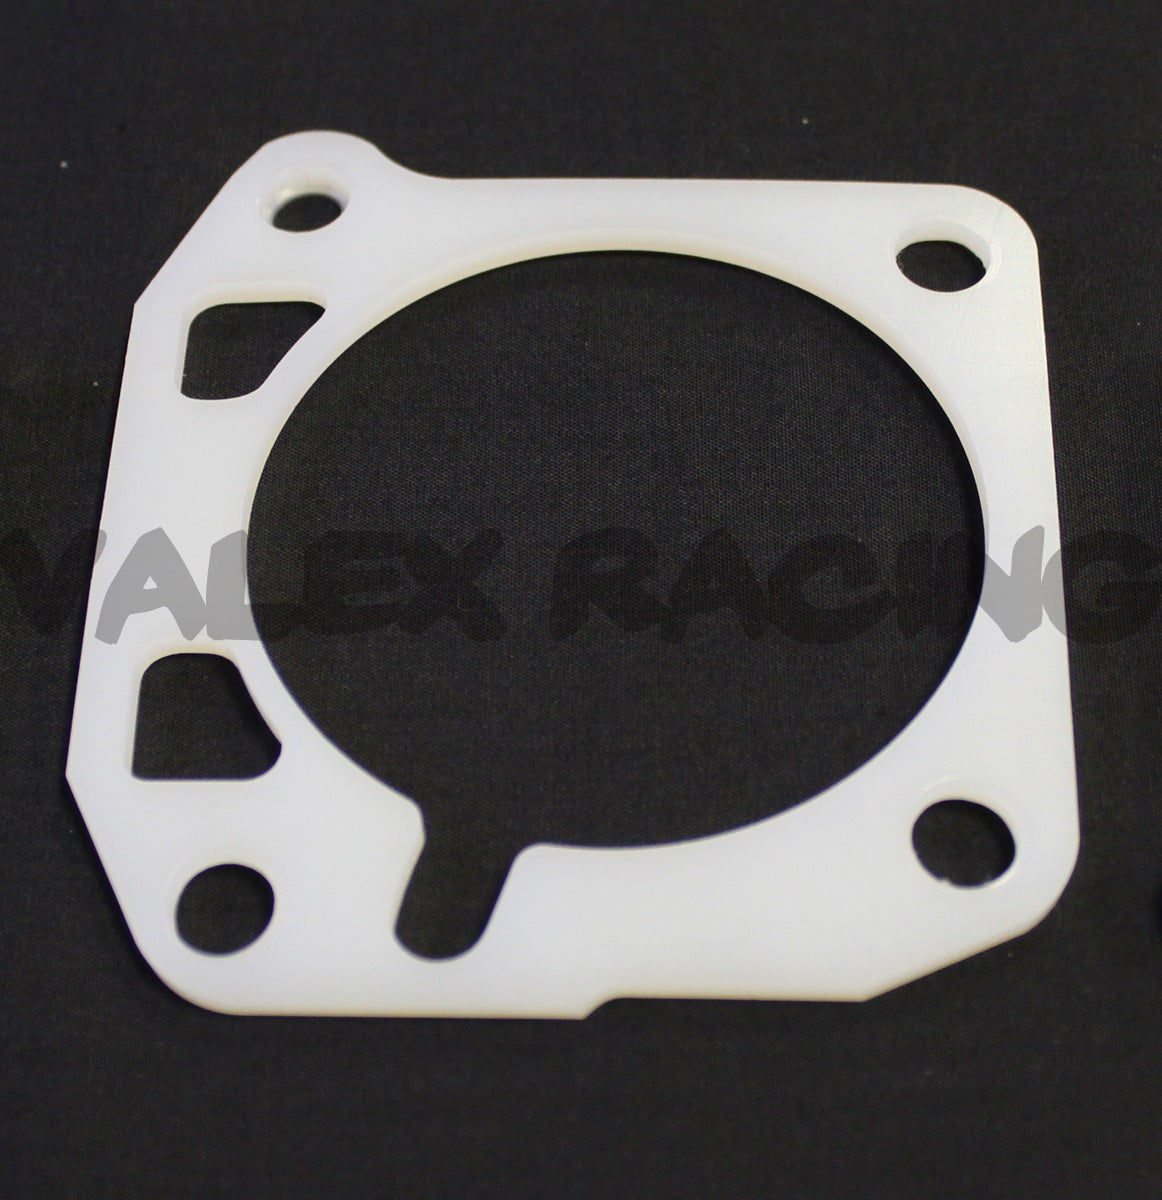 Thermal Throttle Body Gasket For HONDA ACURA B,D Series OEM Size, 64mm, 68mm, 70mm